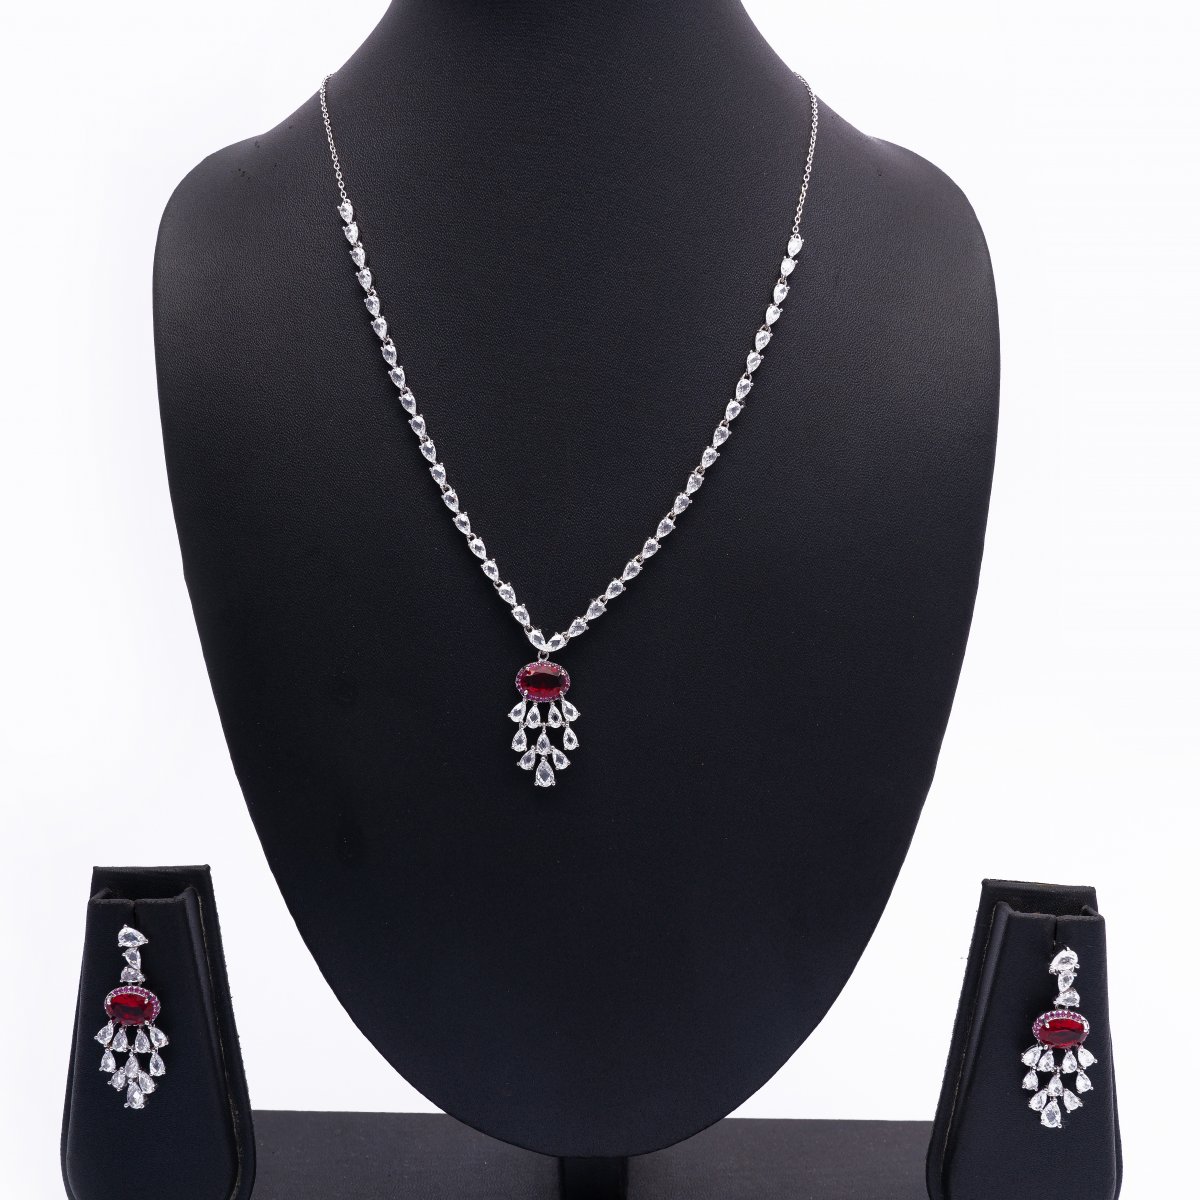 92.5 SILVER NECKLACE WITH EARRINGS SET FOR WOMEN GIRLS 